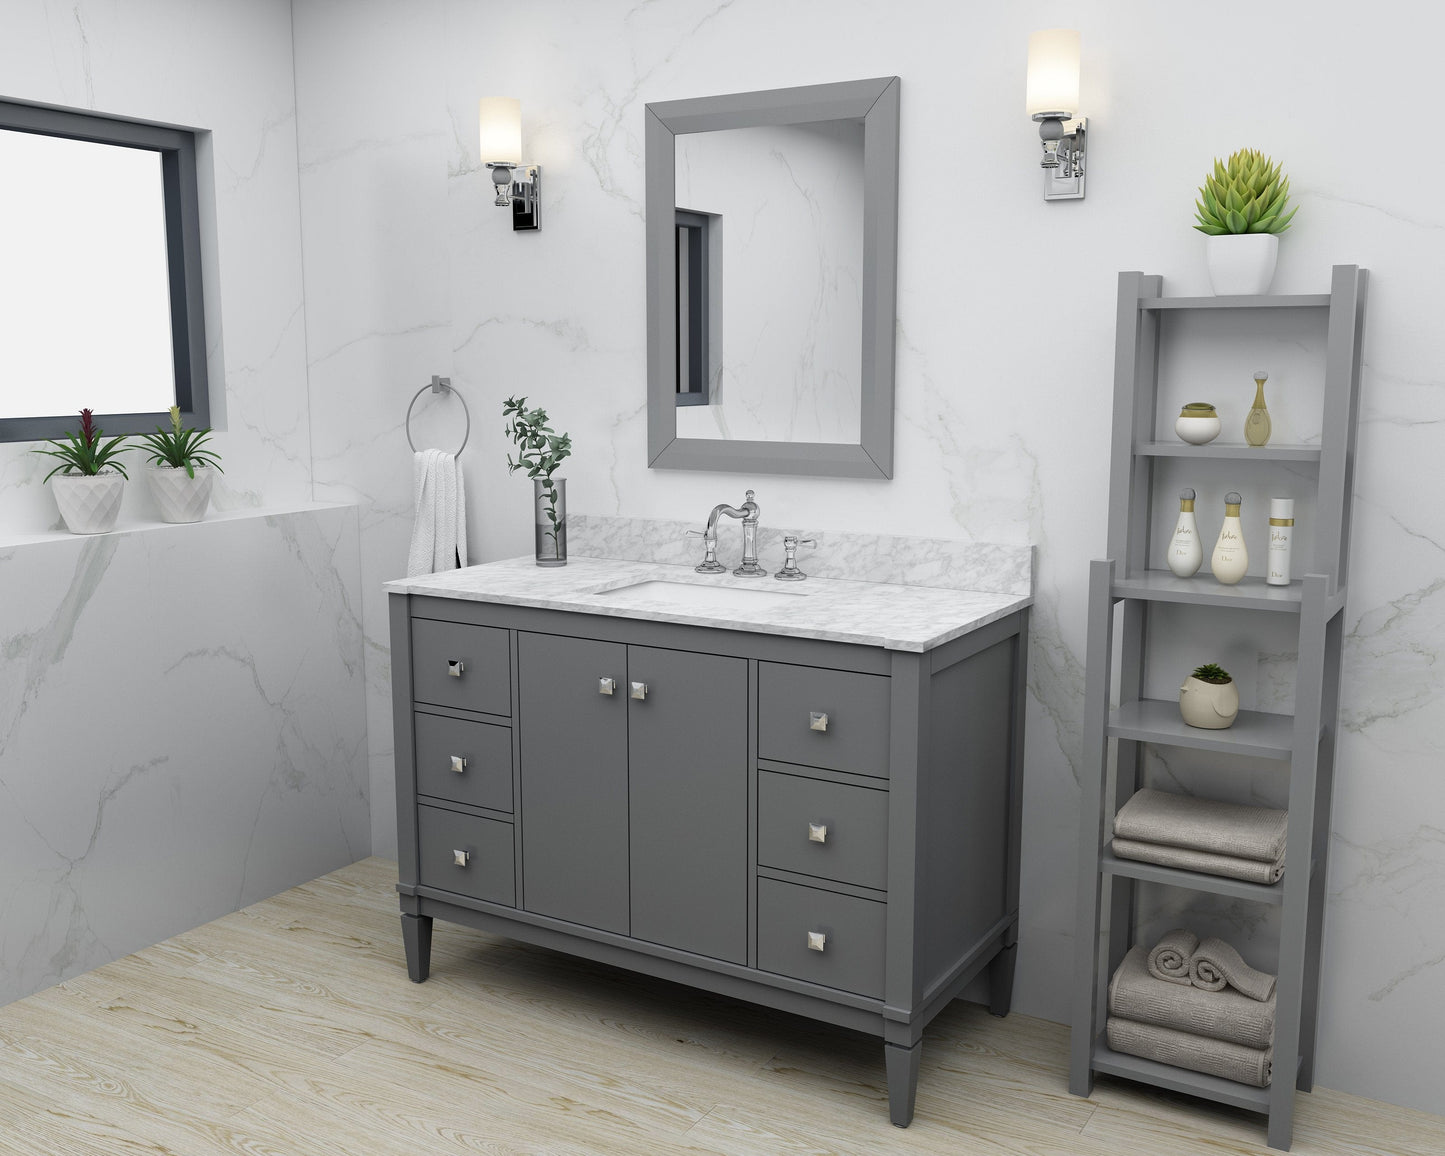 Ancerra Designs Kayleigh 48 in. Bath Vanity Set in Sapphire Gray with 28 in. Mirror